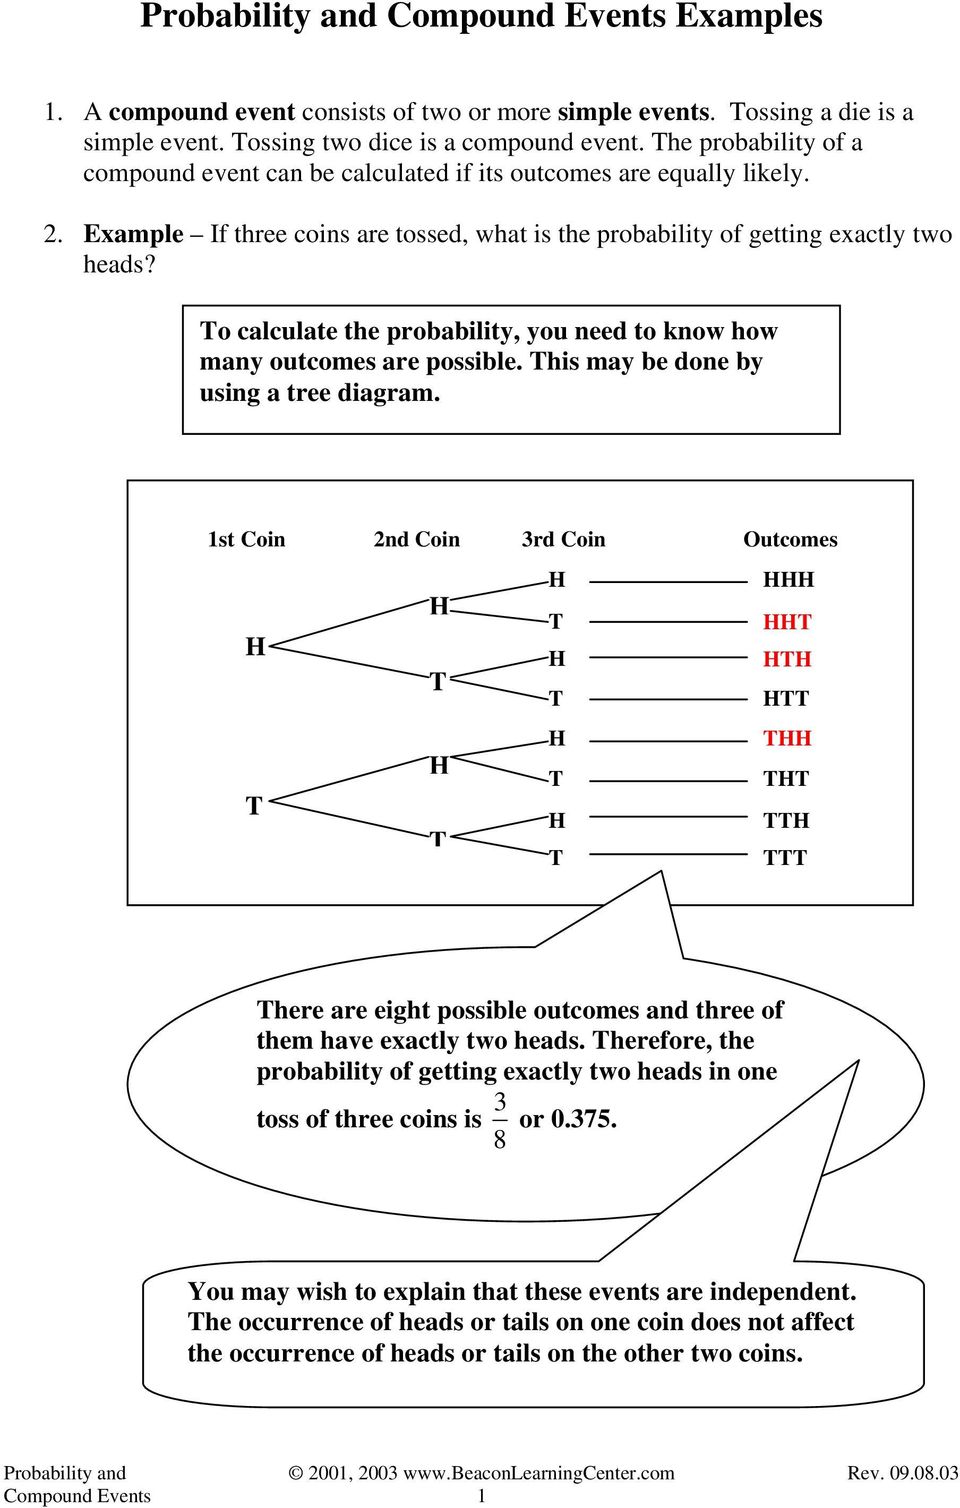 Probability and Compound Events Examples - PDF Free Download With Probability Of Compound Events Worksheet